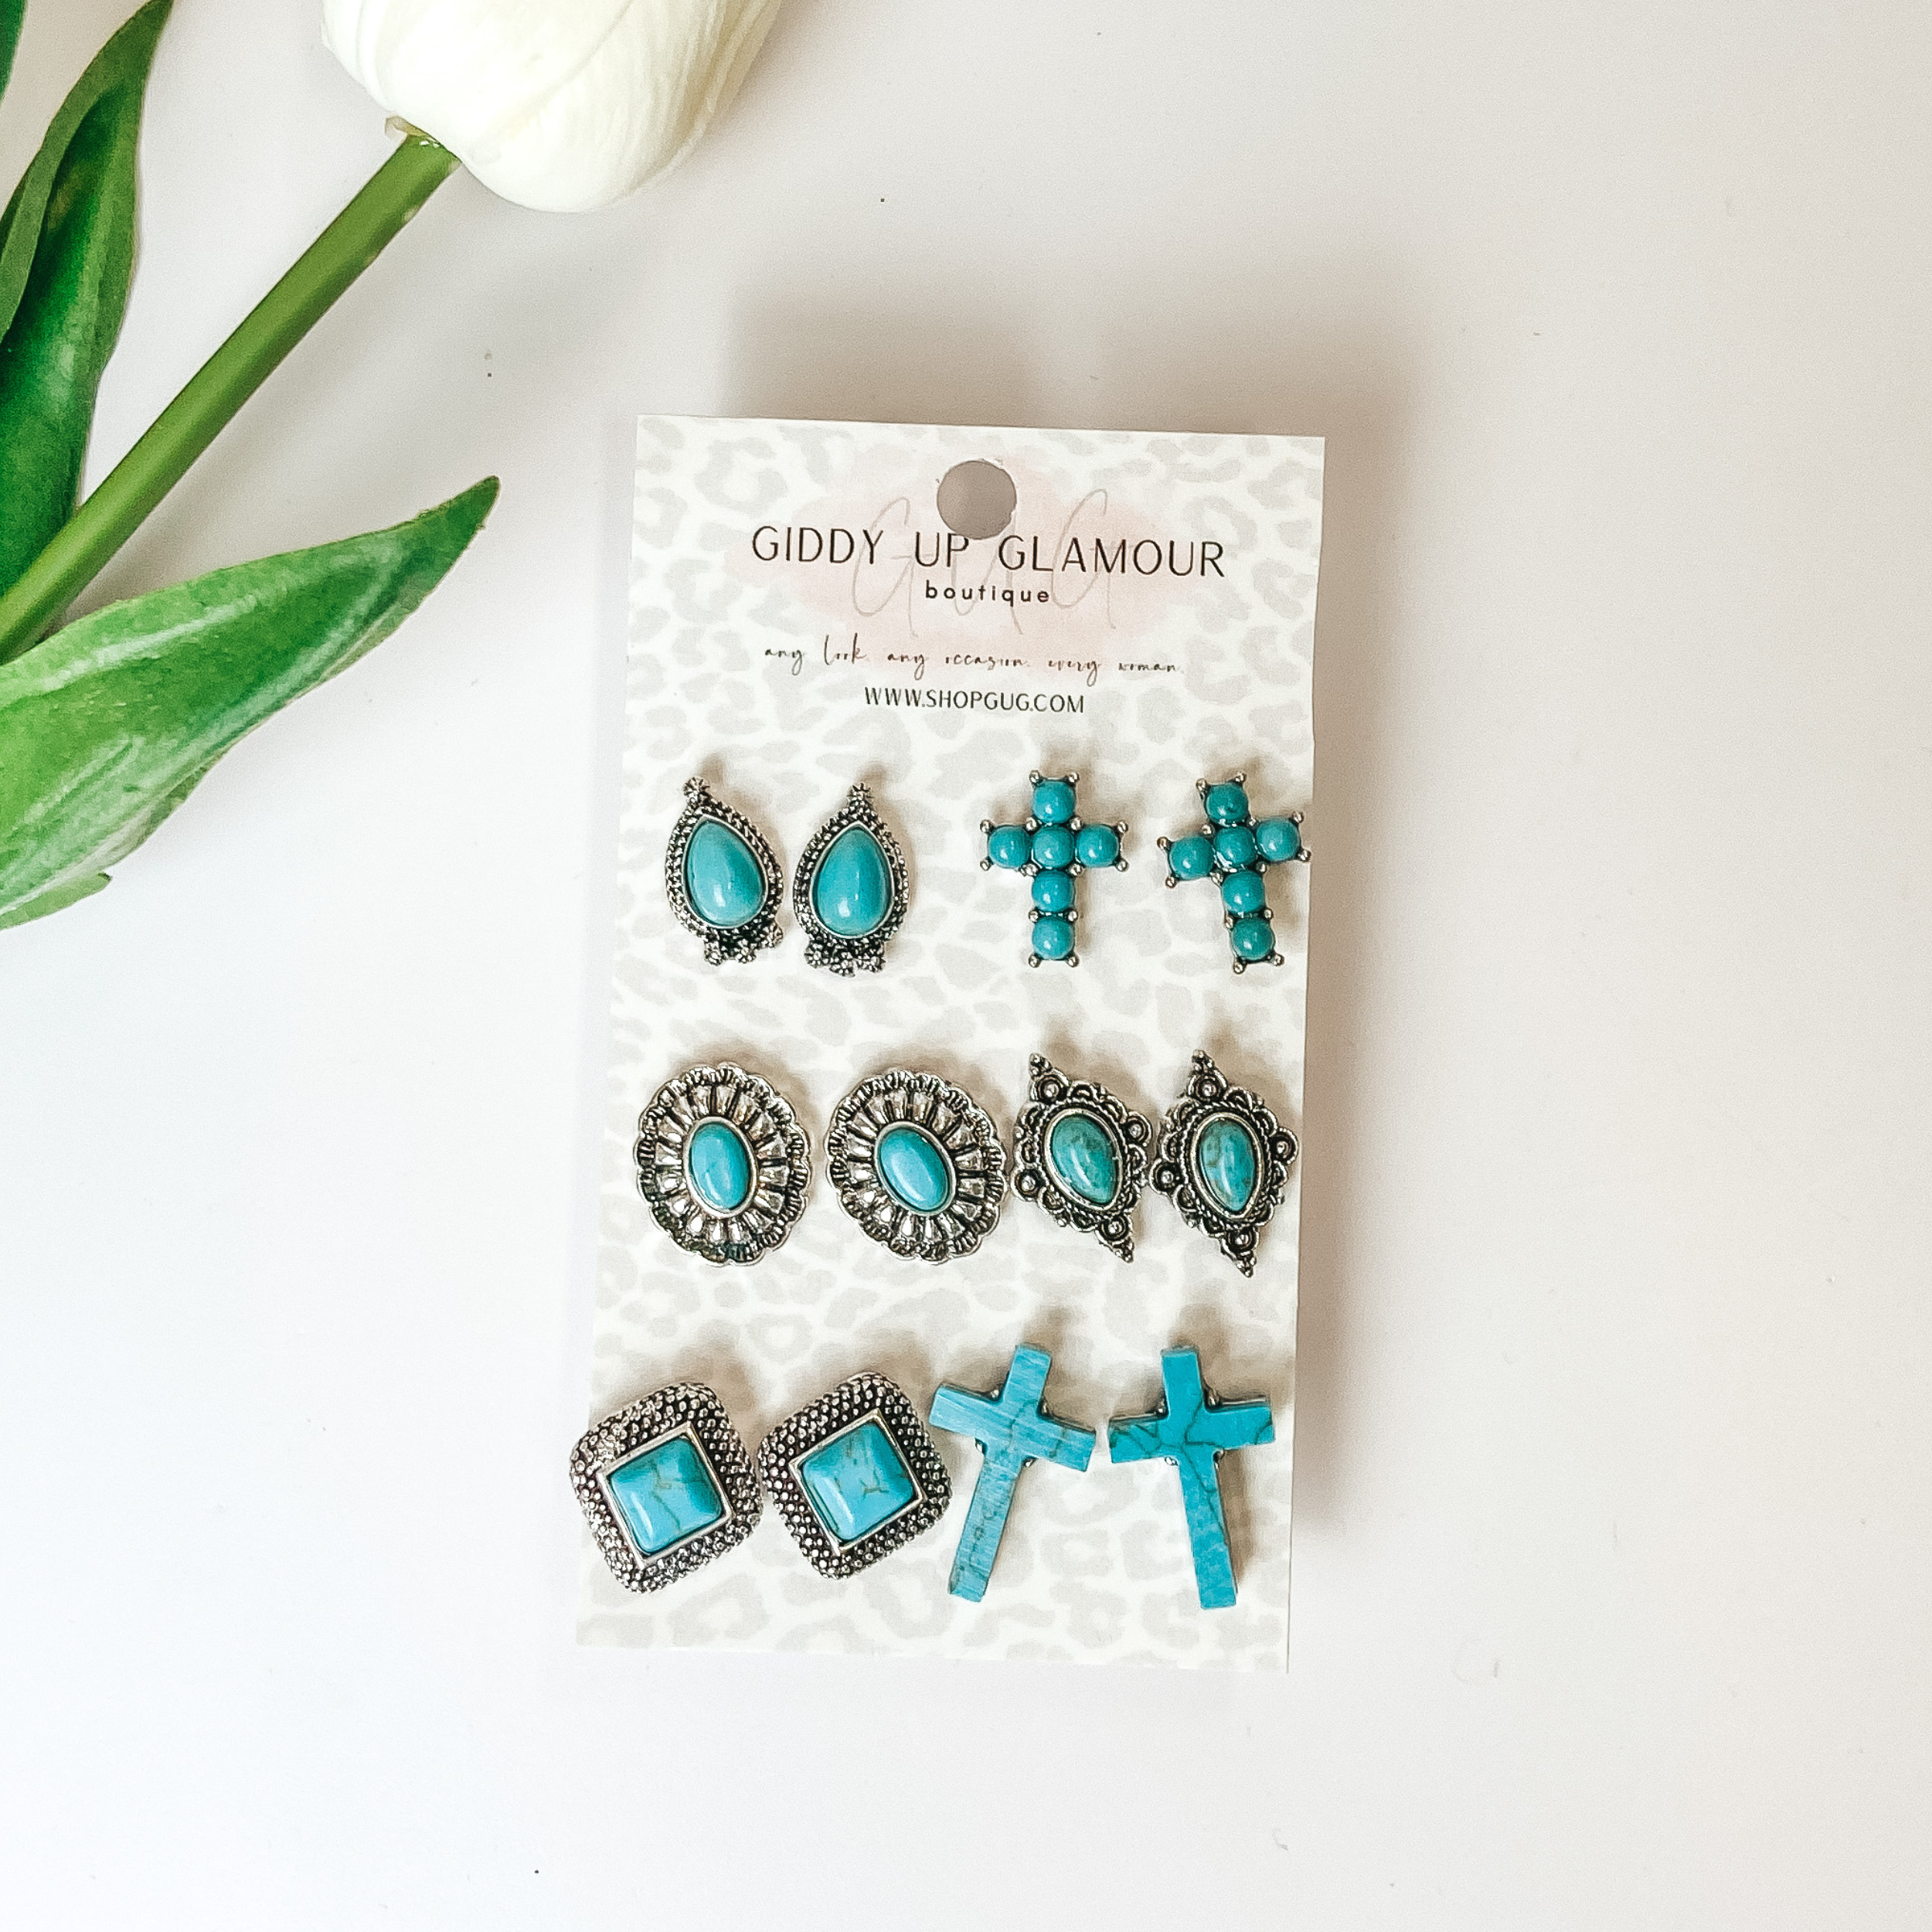 Six turquoise and silver designed stud earrings. Pictured on a white background with a white flower in the top left.